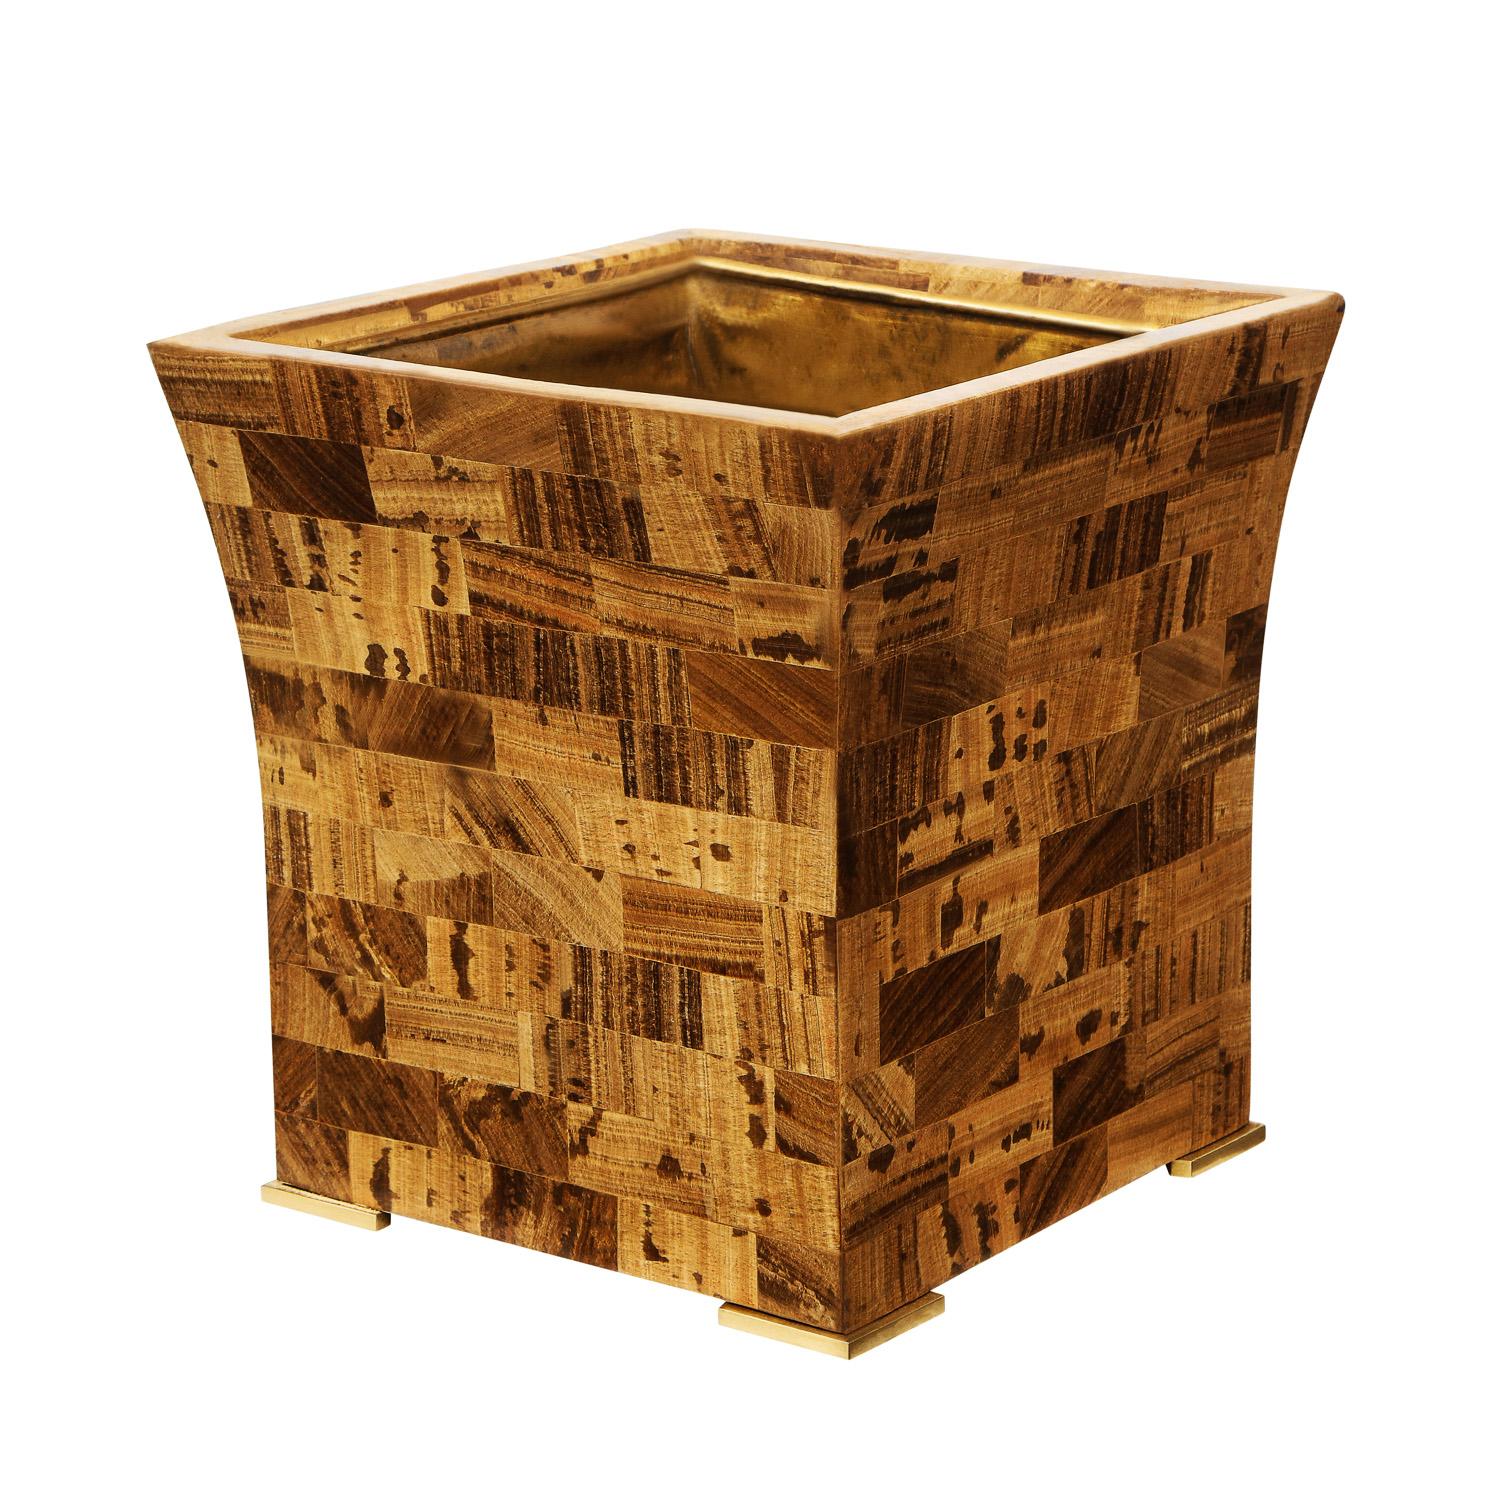 Meticulously crafted waste basket in tessellated travertine with gilded accents and solid brass feet by Maitland Smith for Karl Springer, American 1980's (bottom lined in fabric). Tag on bottom reads “KS-56”. This waste basket is incredible.